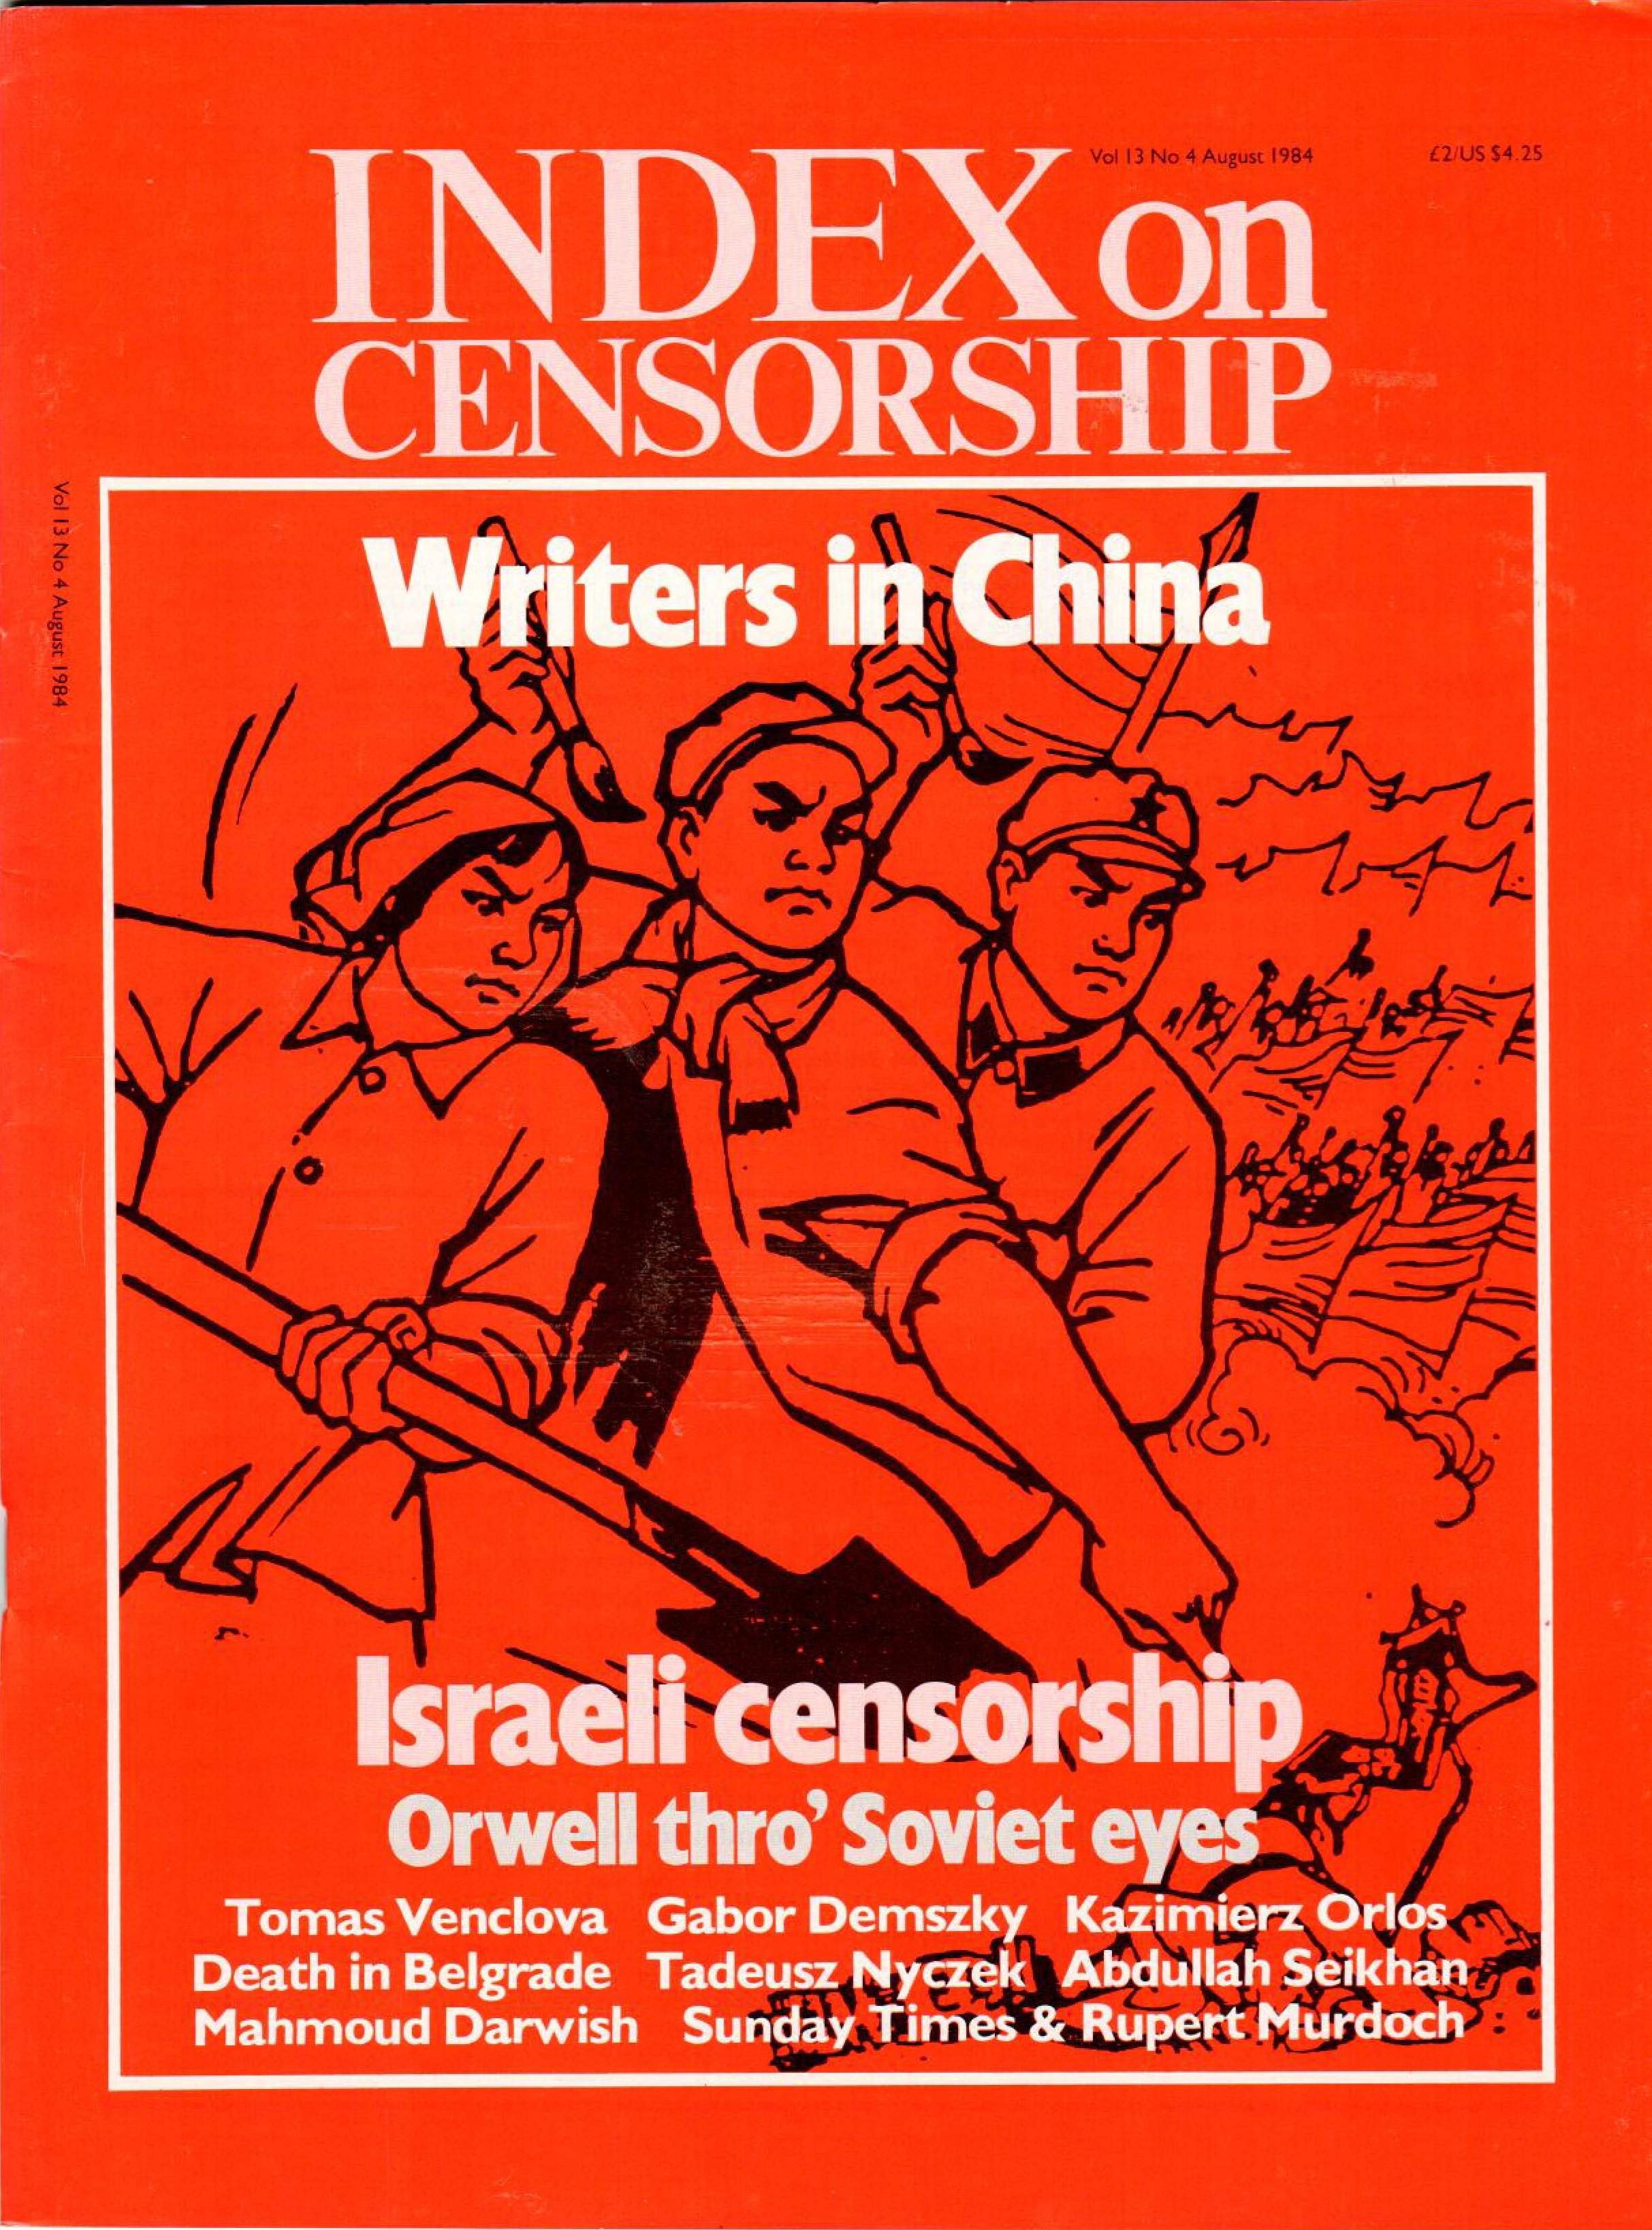 Writers in China, the August 1984 issue of Index on Censorship magazine.